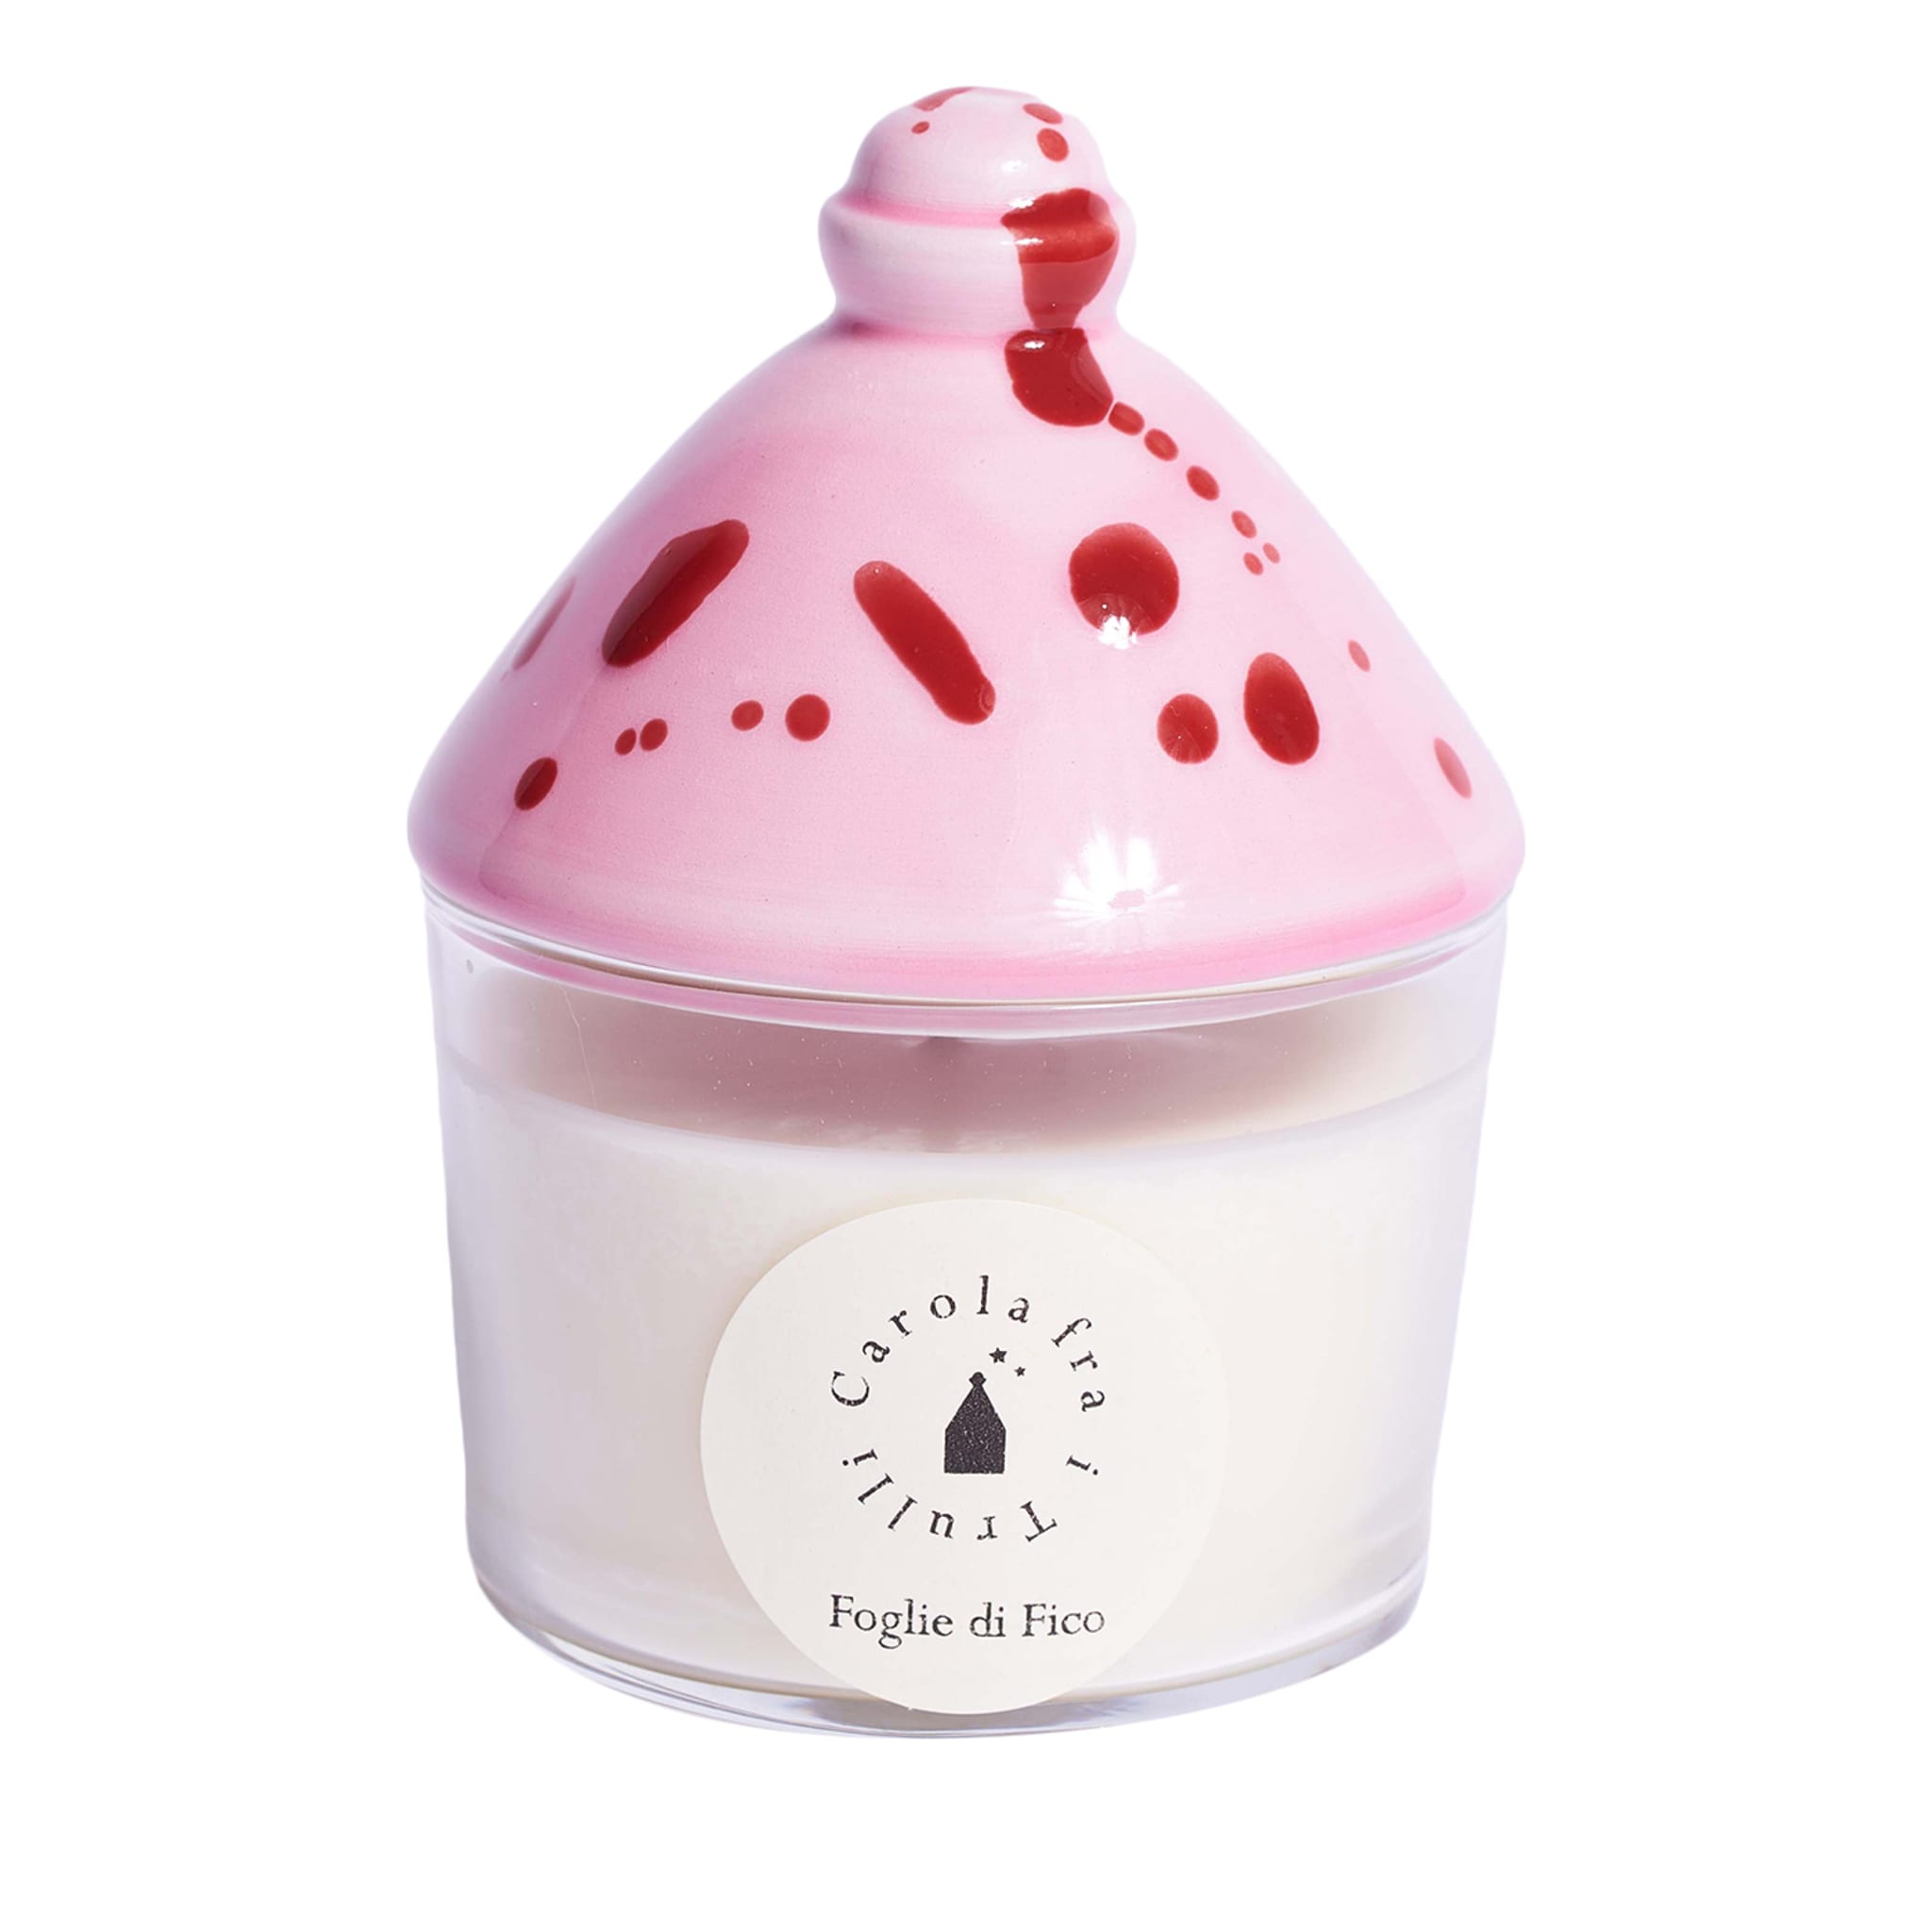 Foglie di Fico Scented Candle with Ceramic Lid #2 - Main view